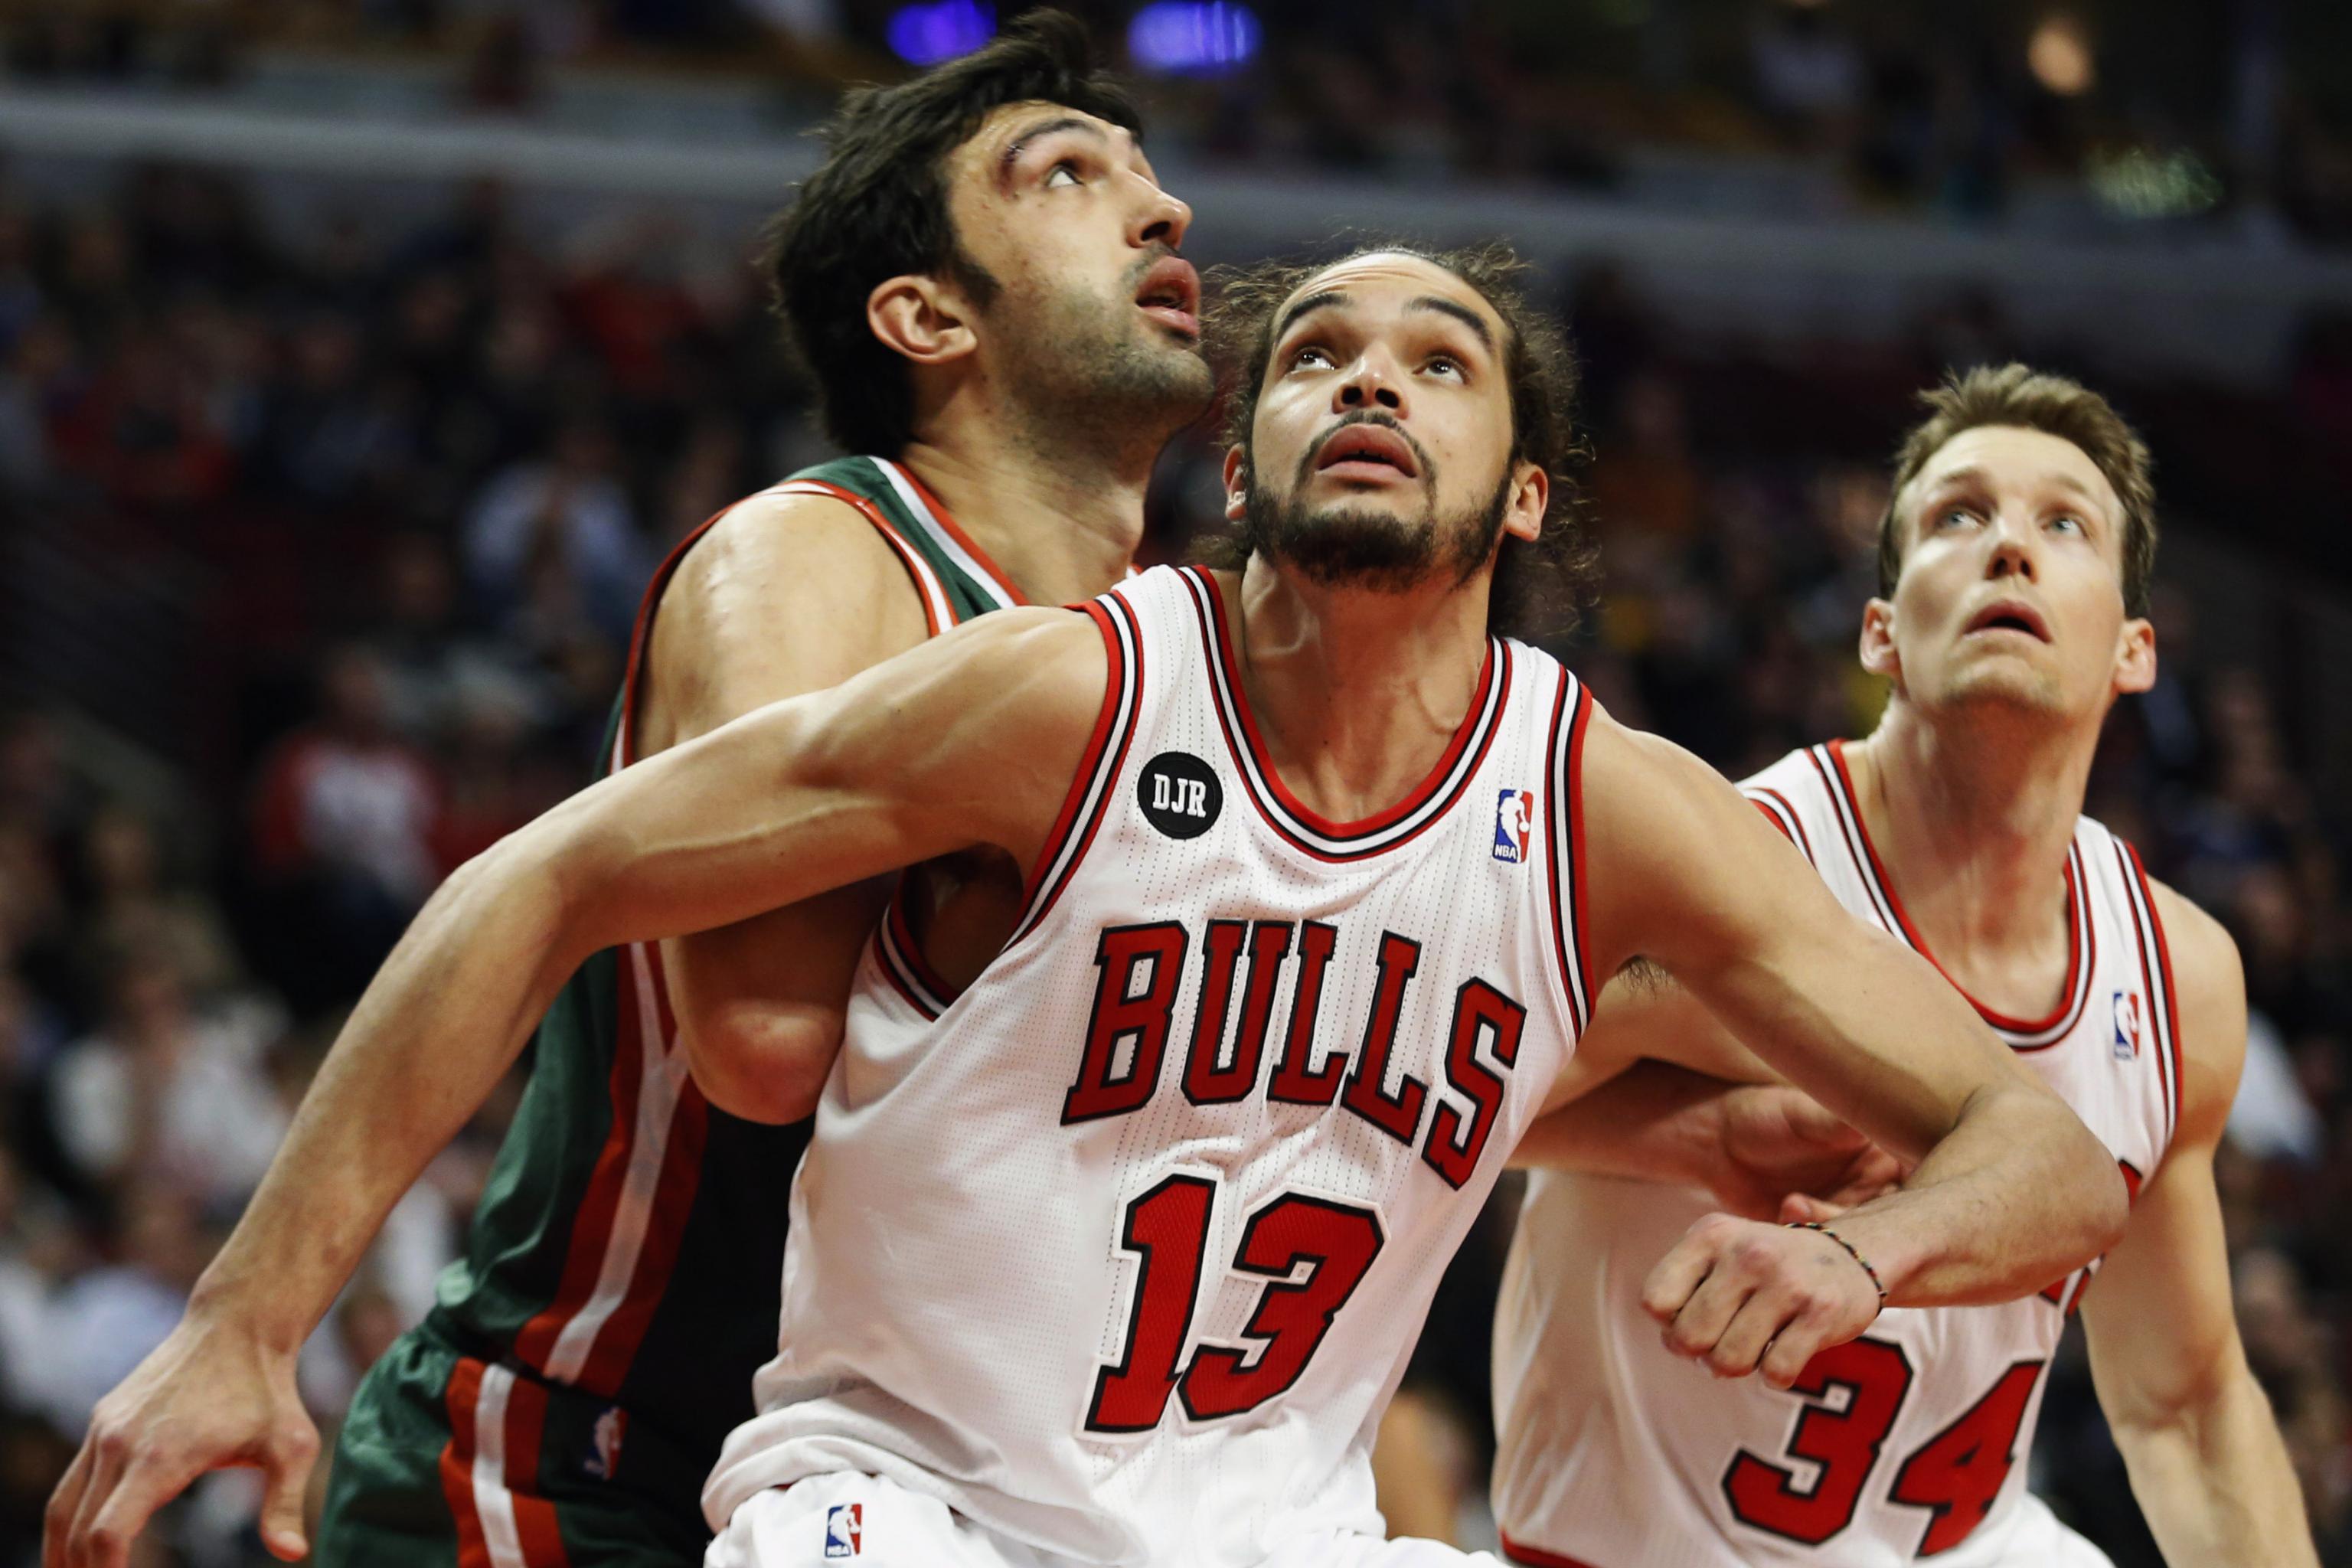 Not long ago, Rose and Noah seemed destined for Bulls history